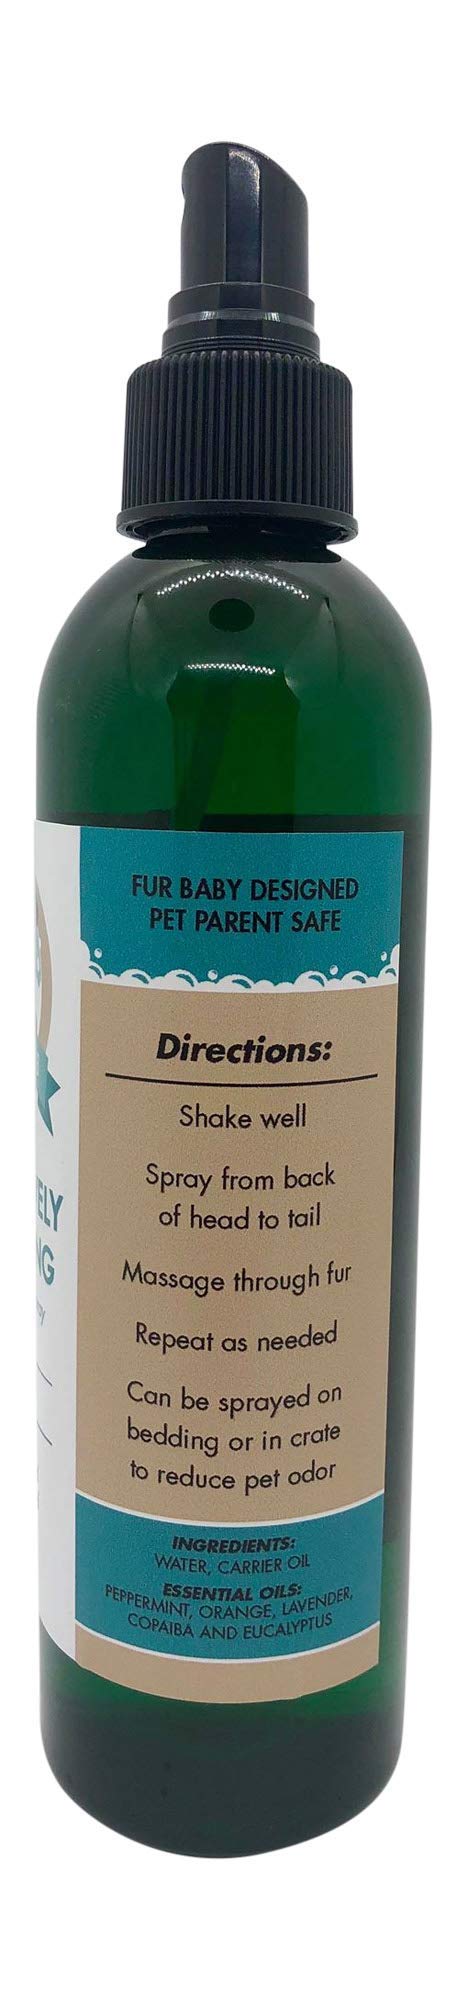 [Australia] - MuttScrub Pawsitively Soothing Bundle: (1) Dog Anti Itch Shampoo, (1) Natural Deodorant Spray, and (1) Healing Antibacterial Lotion for Dry Itchy Skin, Paws, Hot Spots, Dermatitis Natural Soothing Spray 